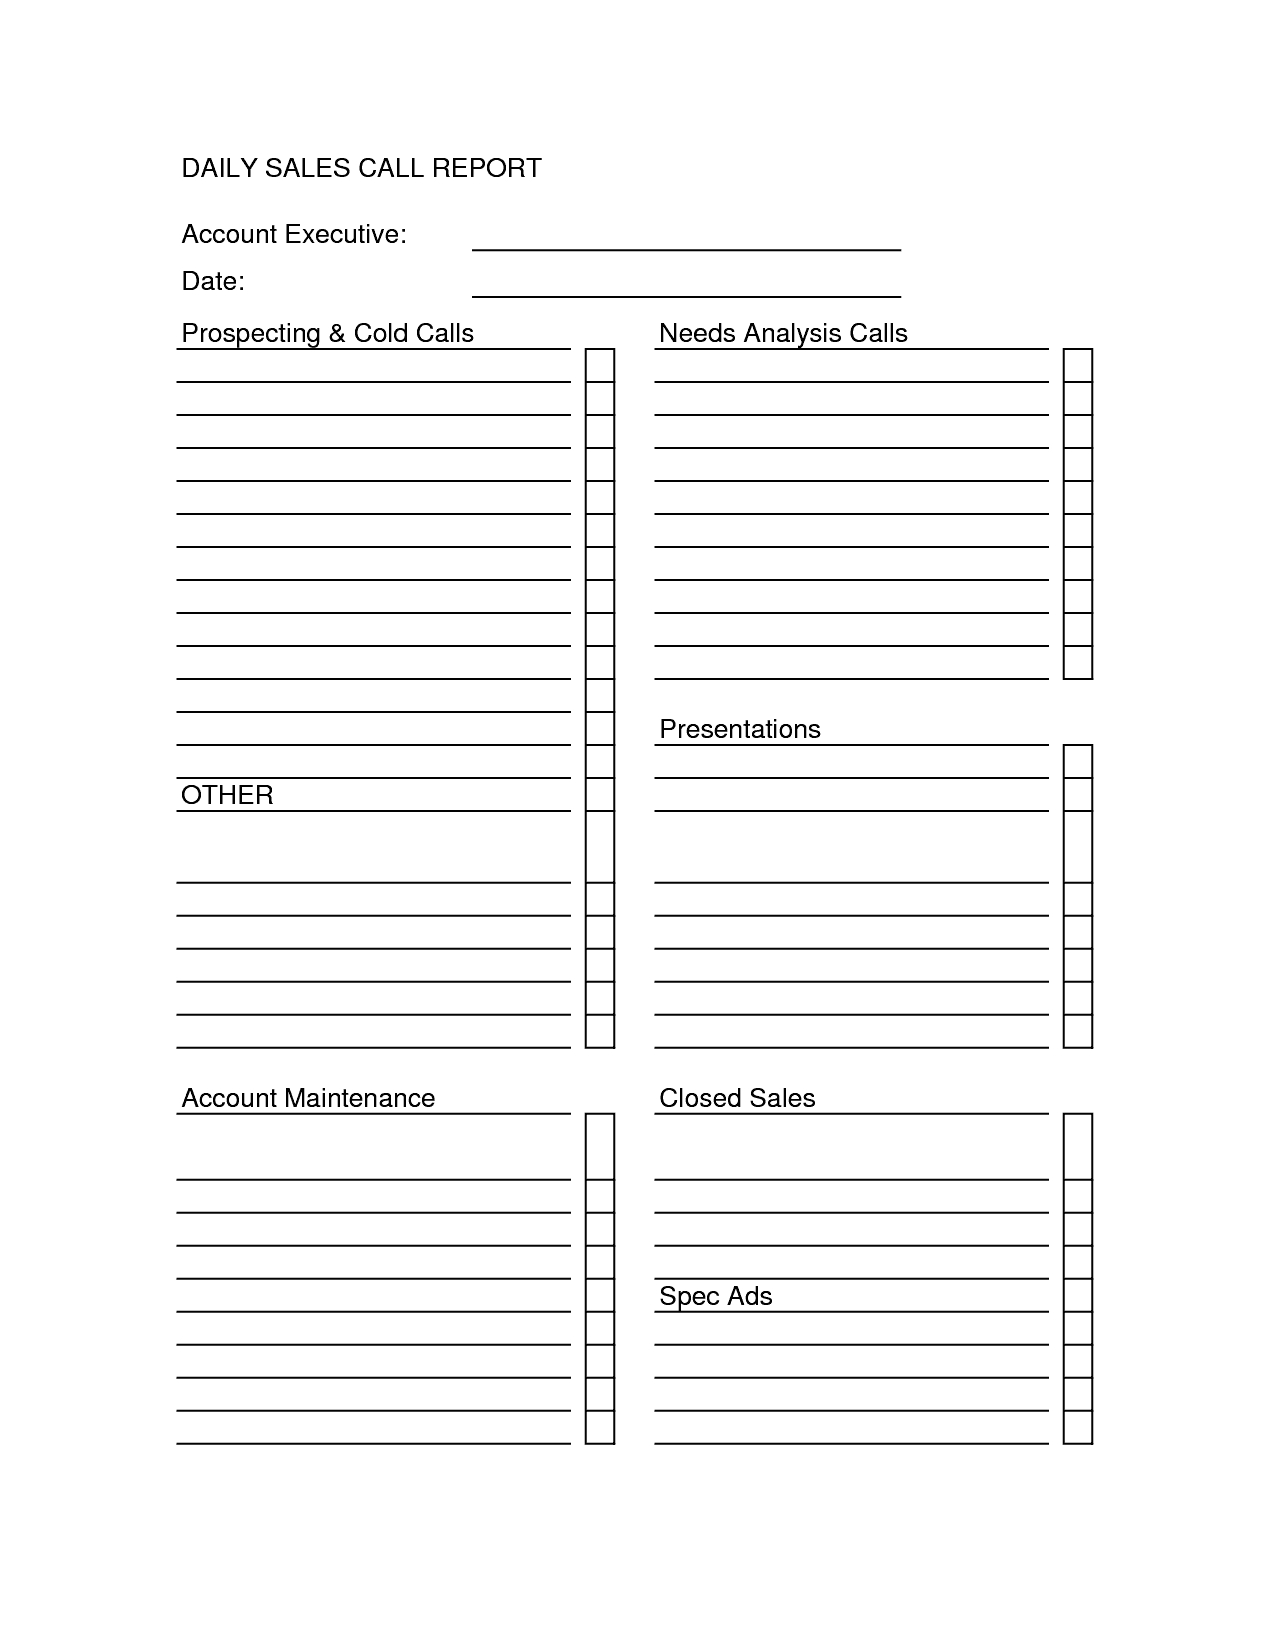 Sales Call Report Templates - Word Excel Fomats Intended For Daily Sales Call Report Template Free Download